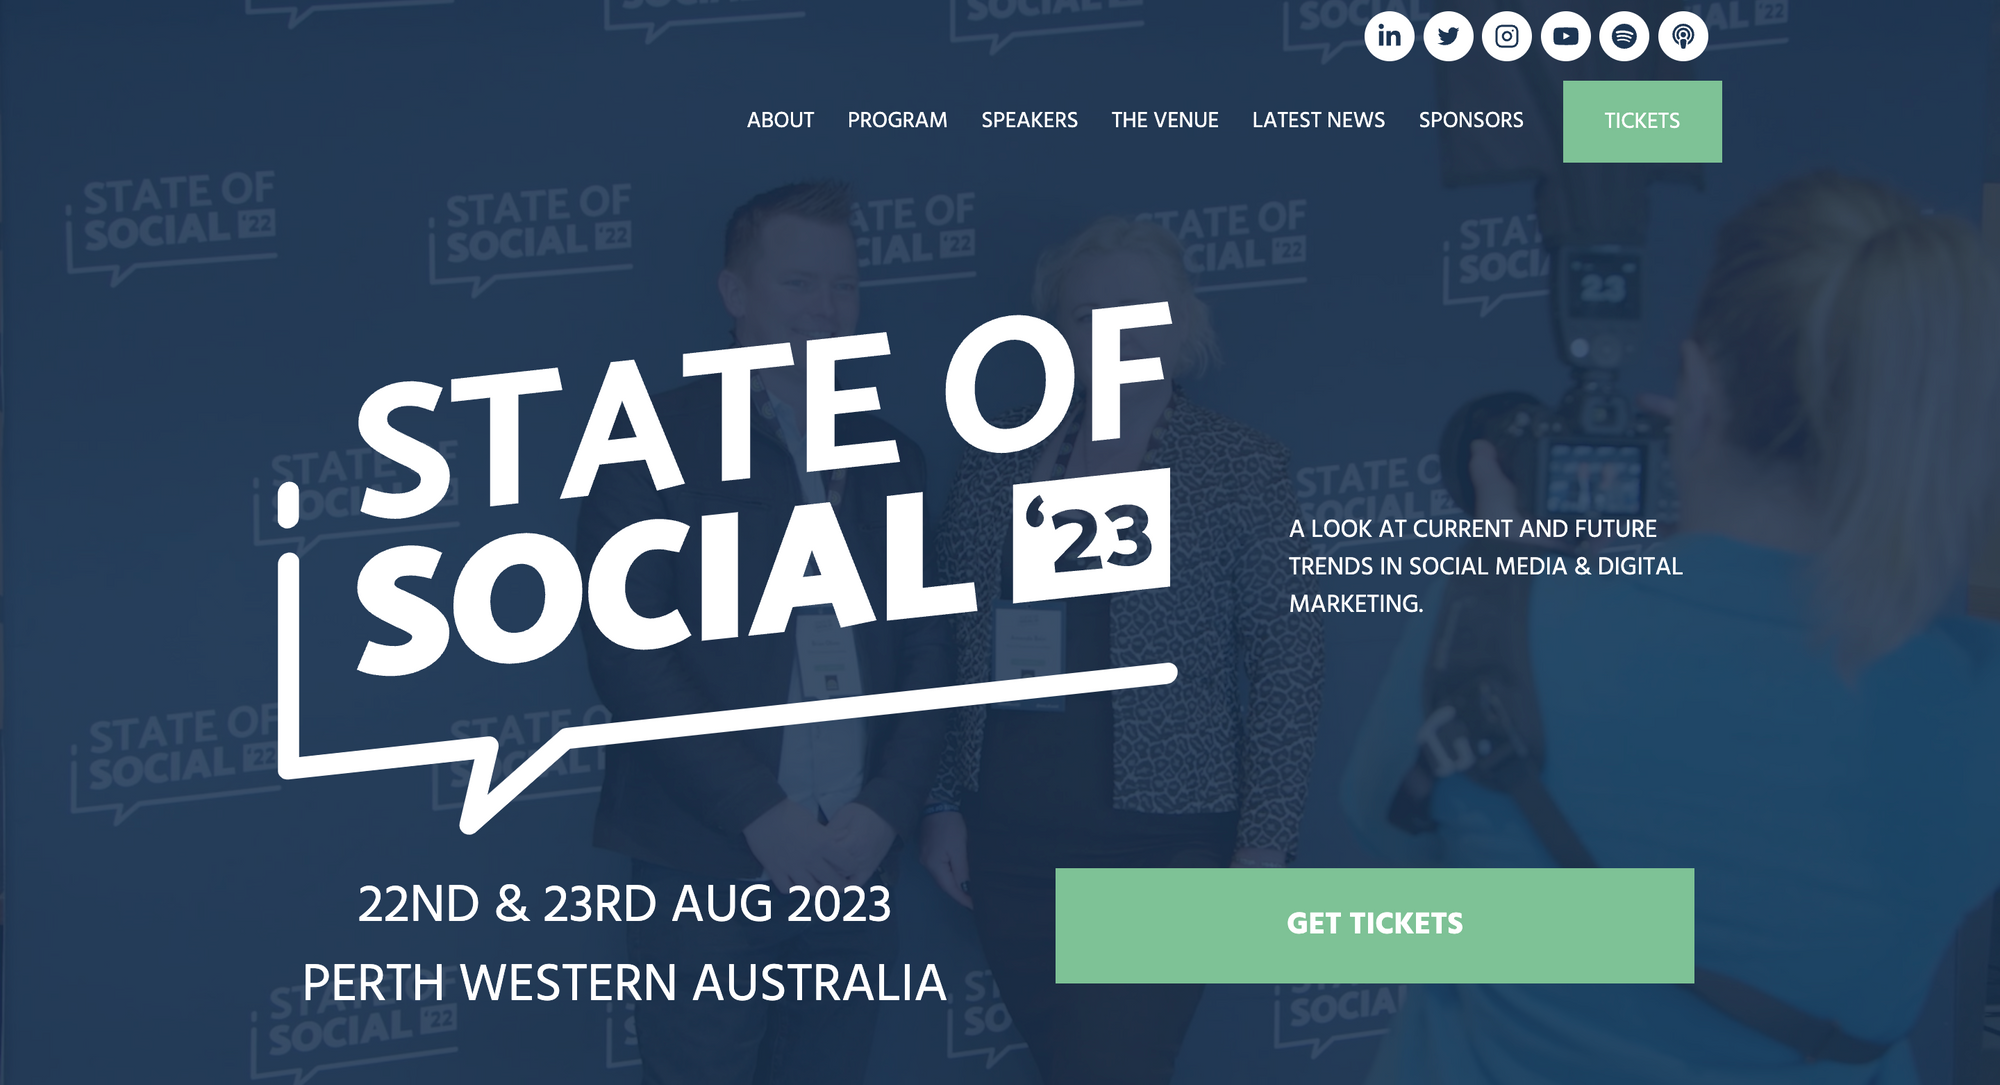 A screenshot of the main page of the state of social 2023 conference